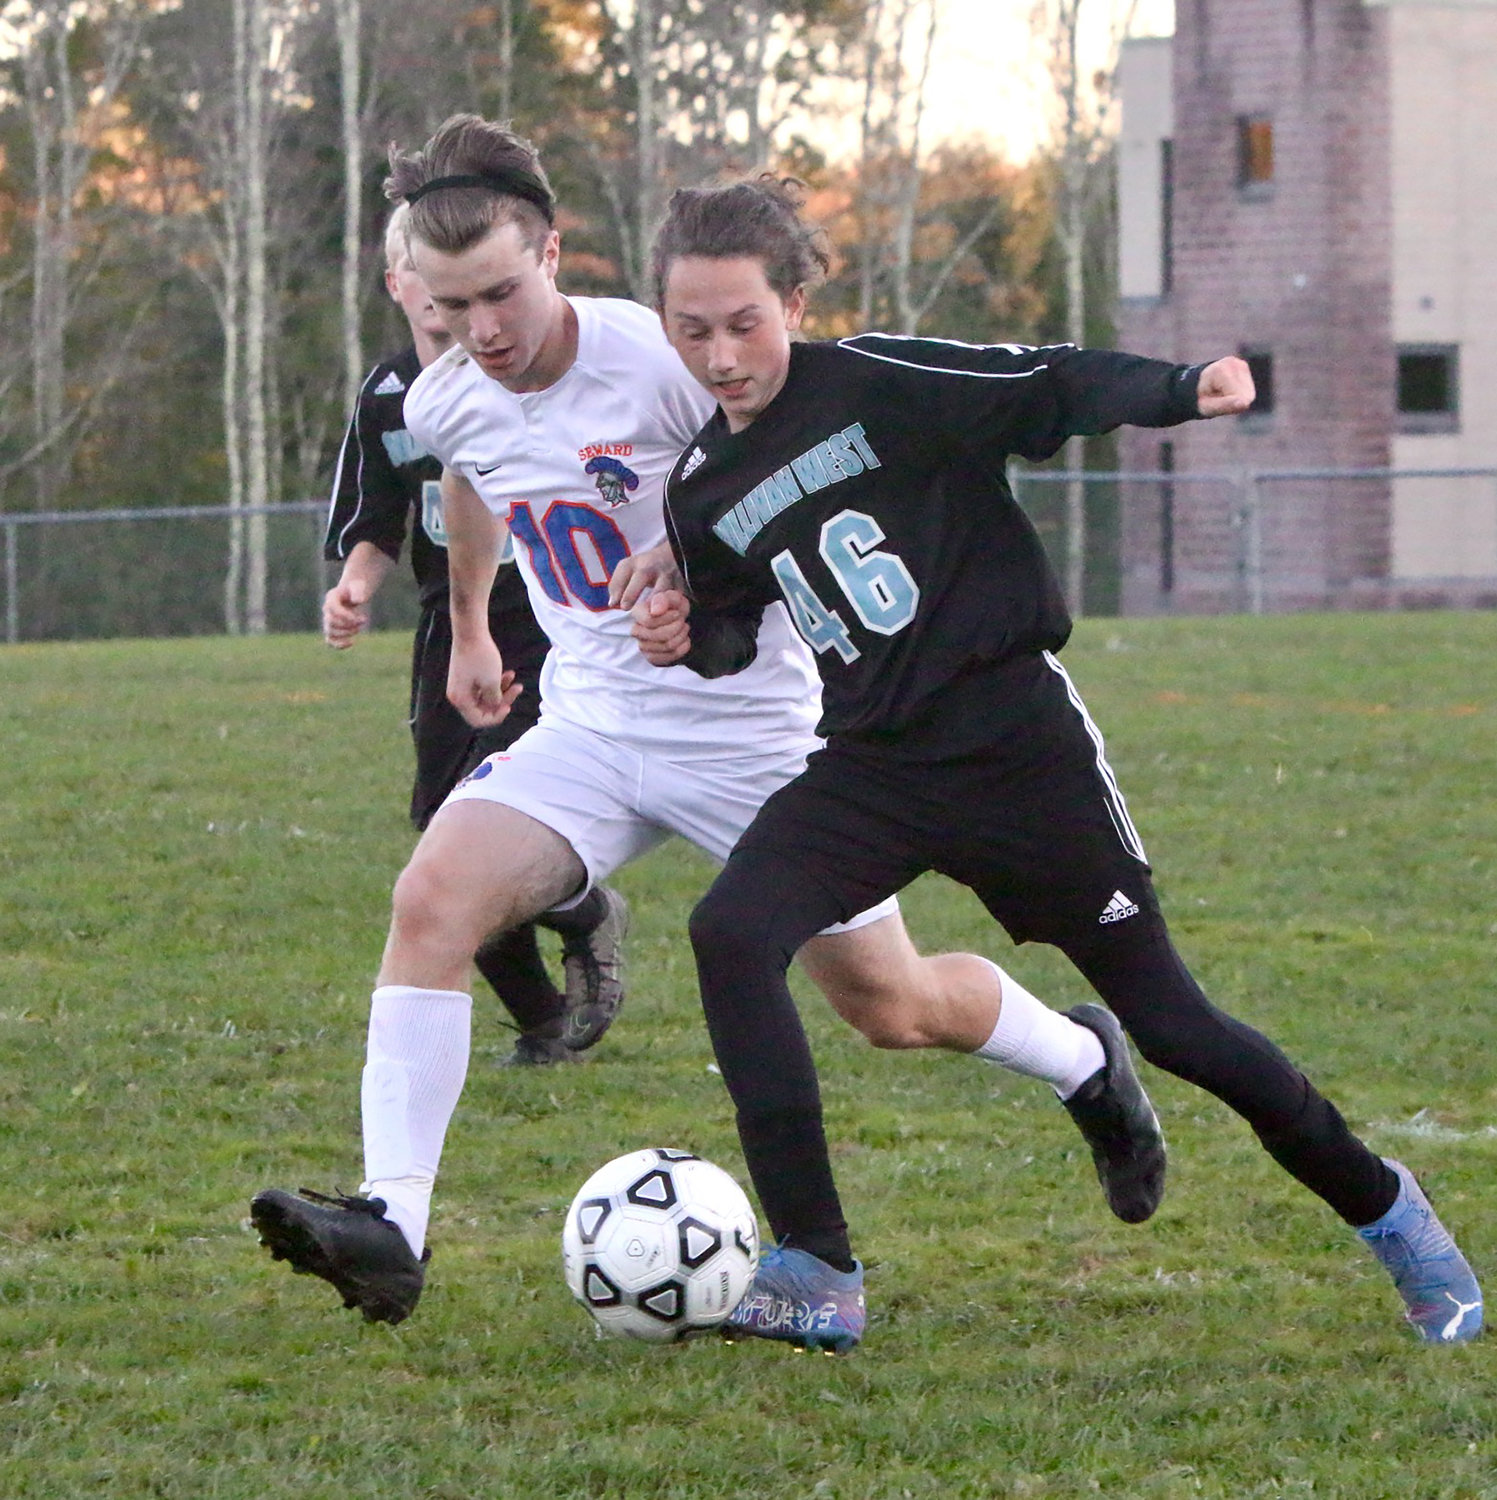 Sullivan West’s Nic Perez vies for control of a ball in midfield against Seward’s Cole Buchalski.